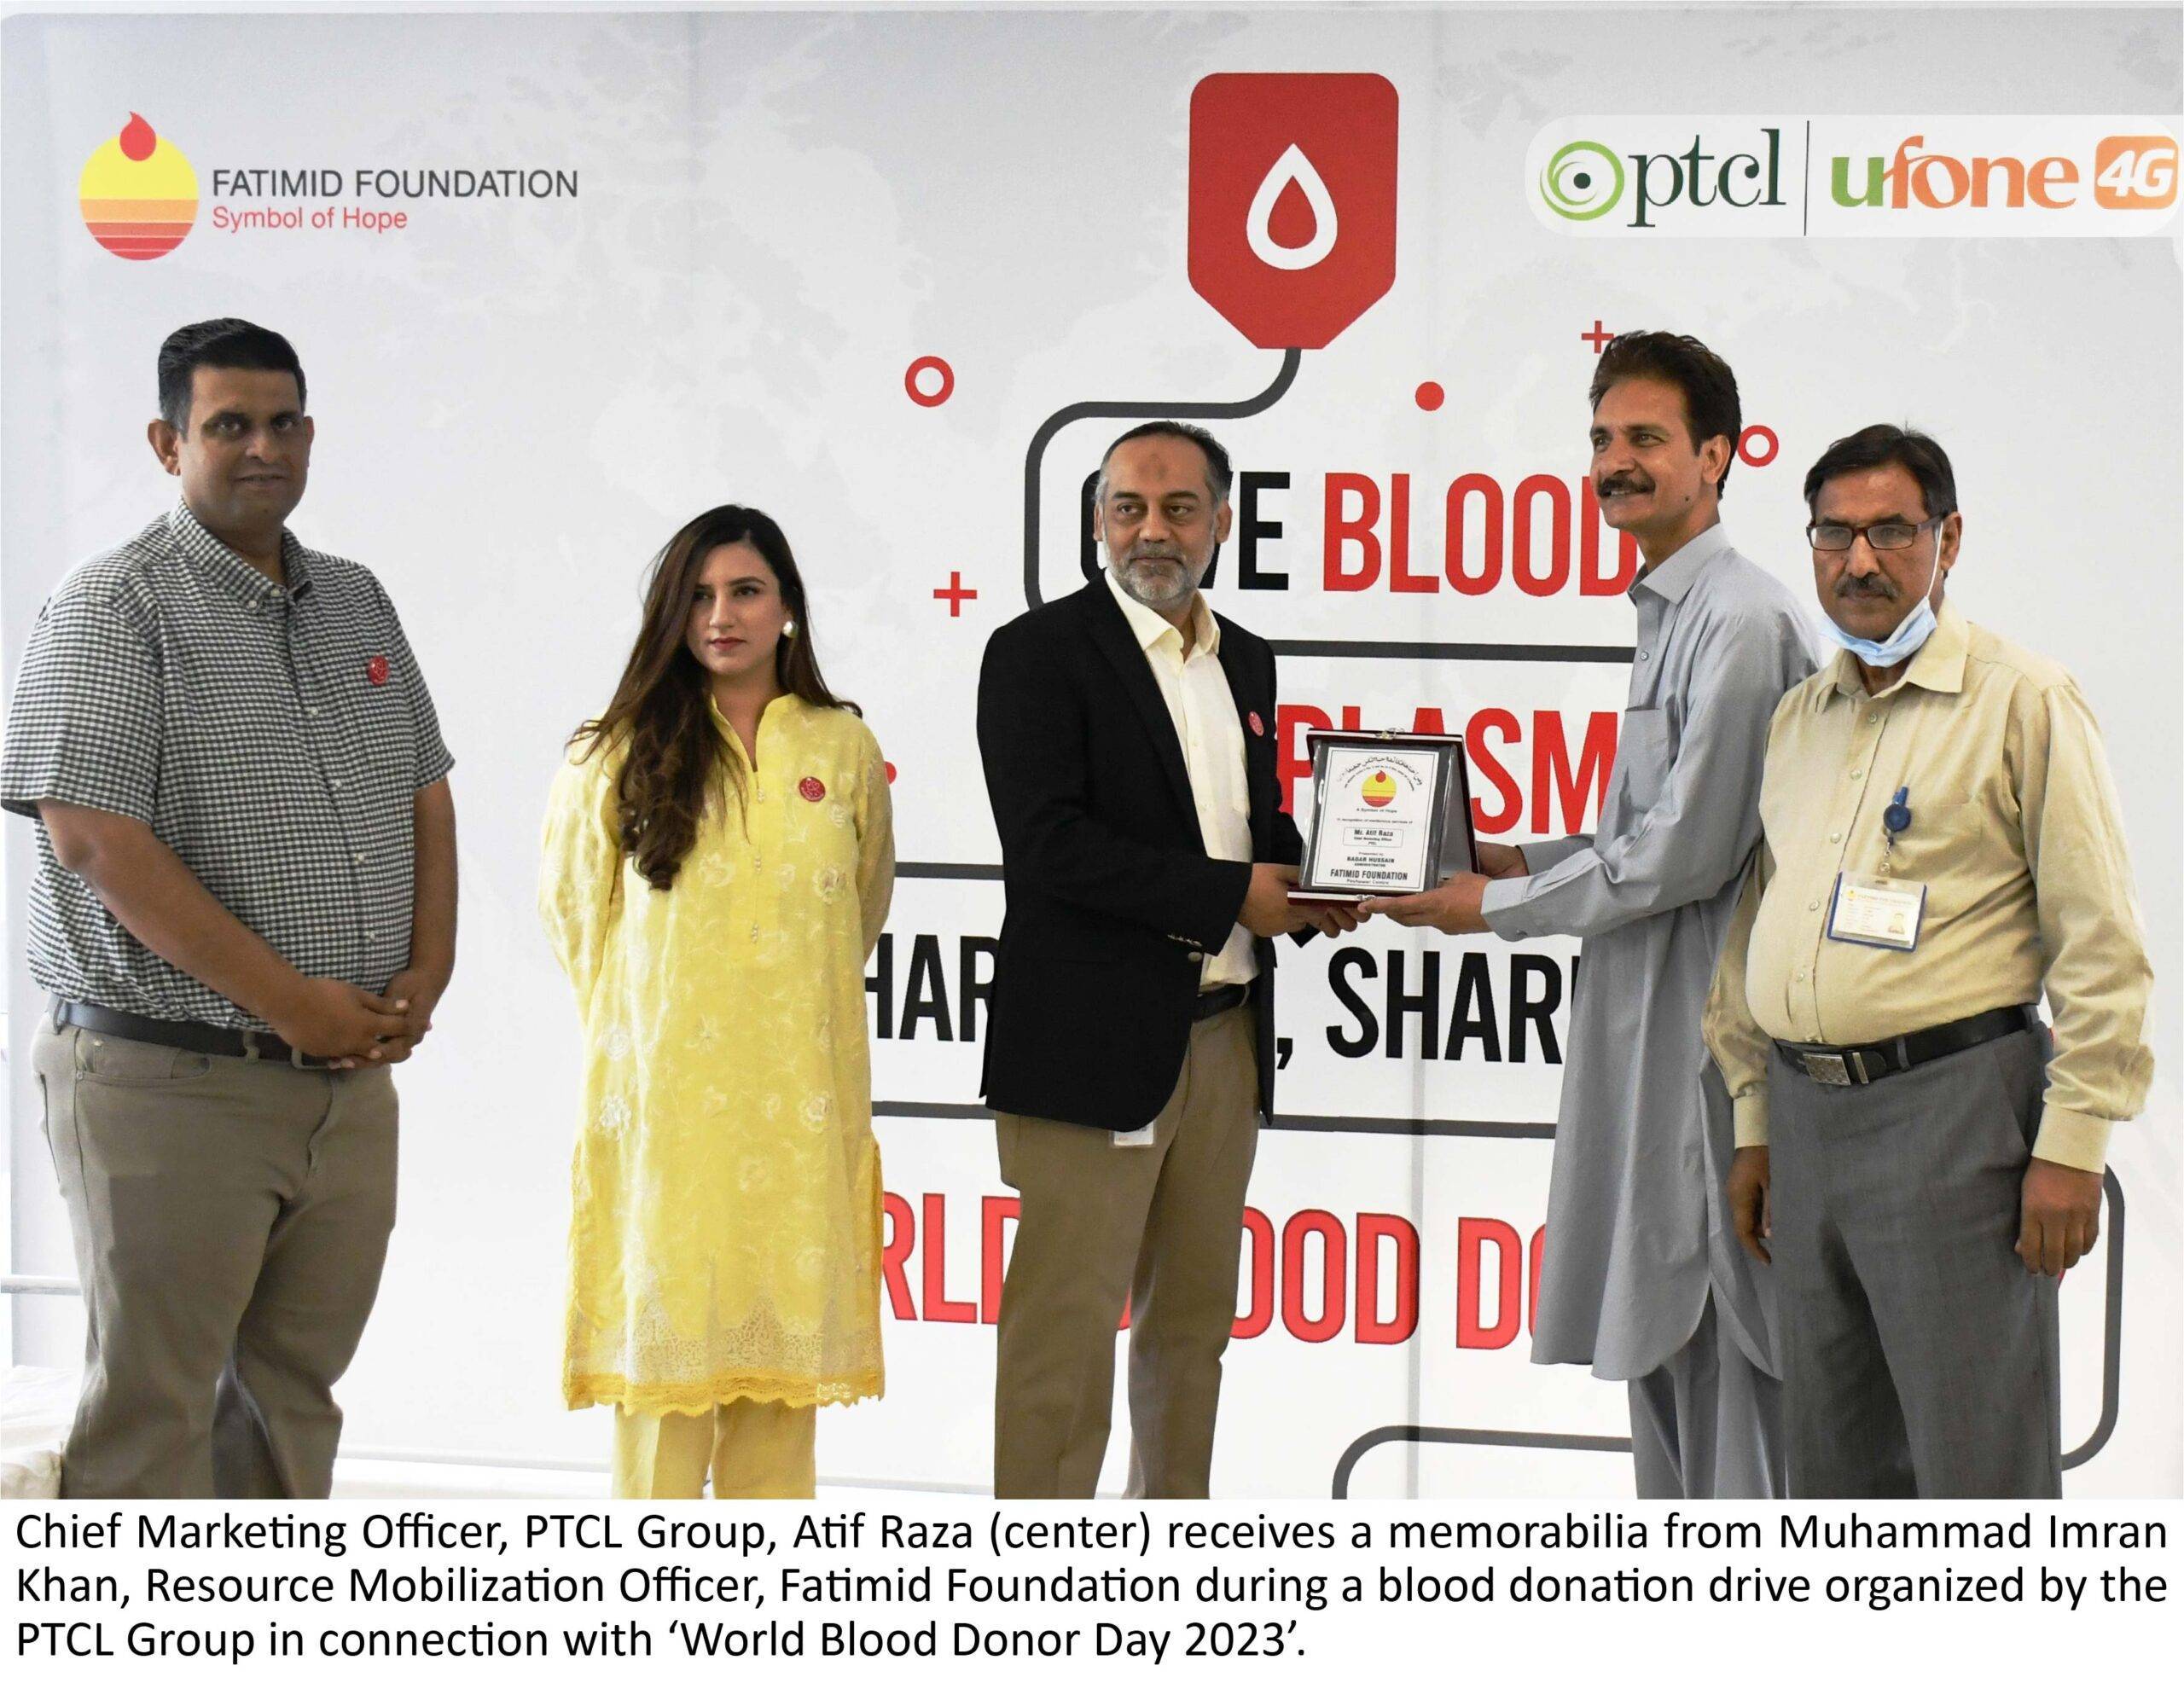 PTCL Group mobilizes blood donation drive to help give life another chance